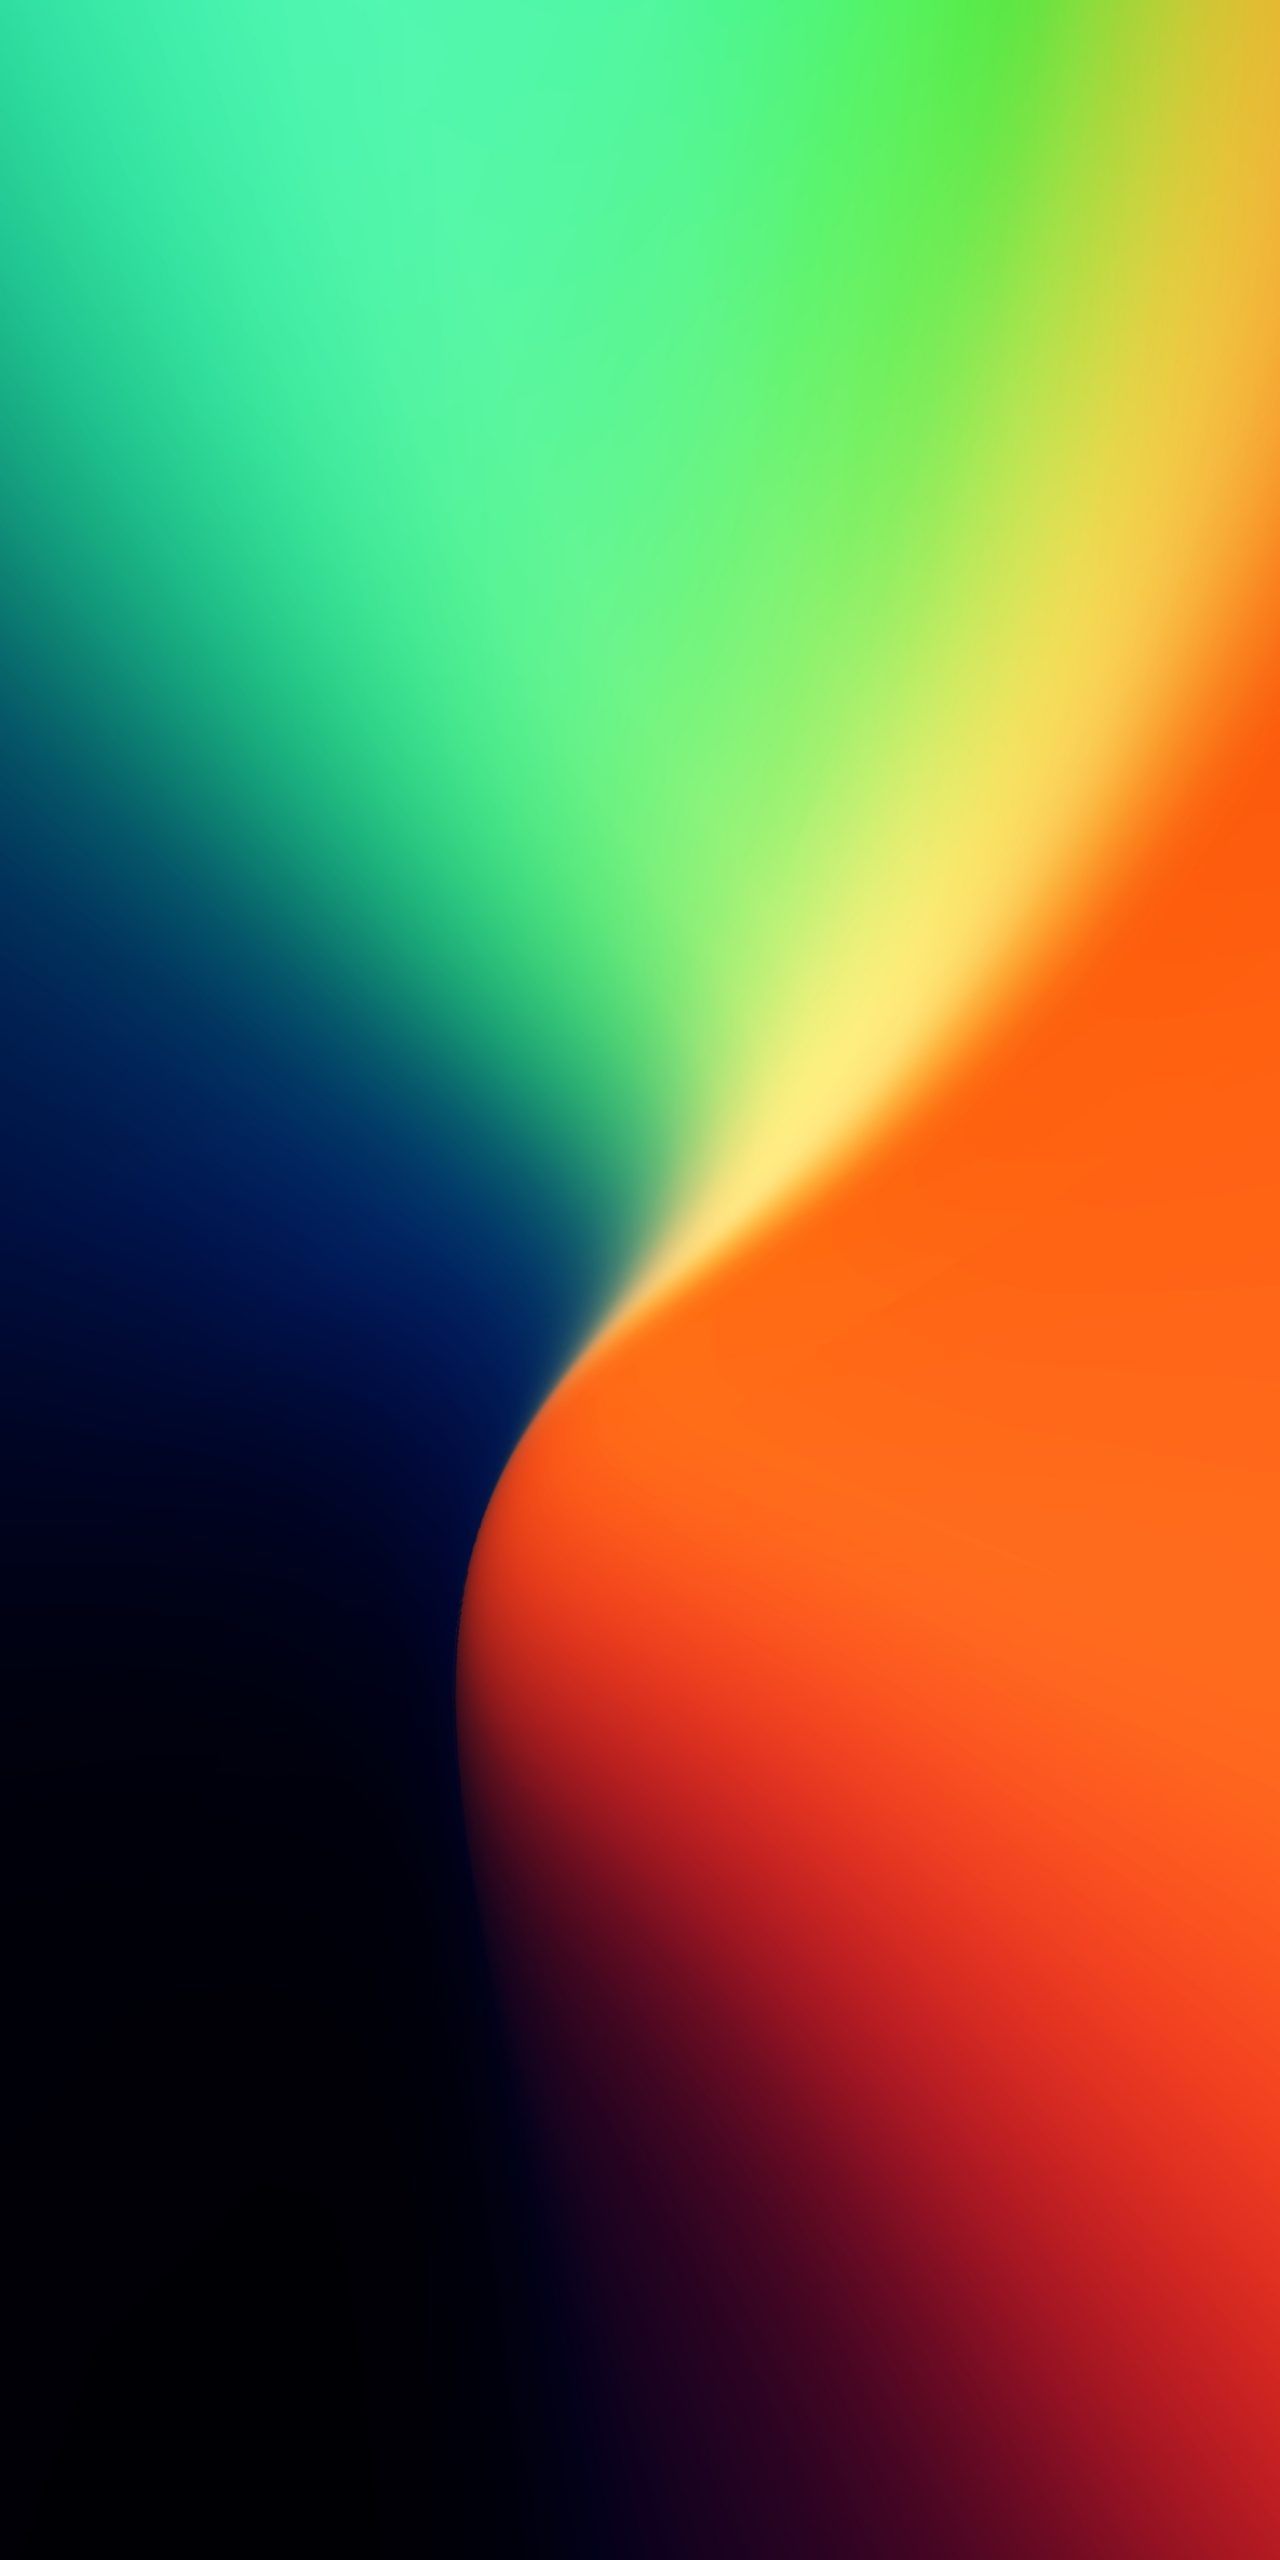 Gradient blue, orange, green and yellow. Color wallpaper iphone, iPhone wallpaper gradient, iPhone homescreen wallpaper